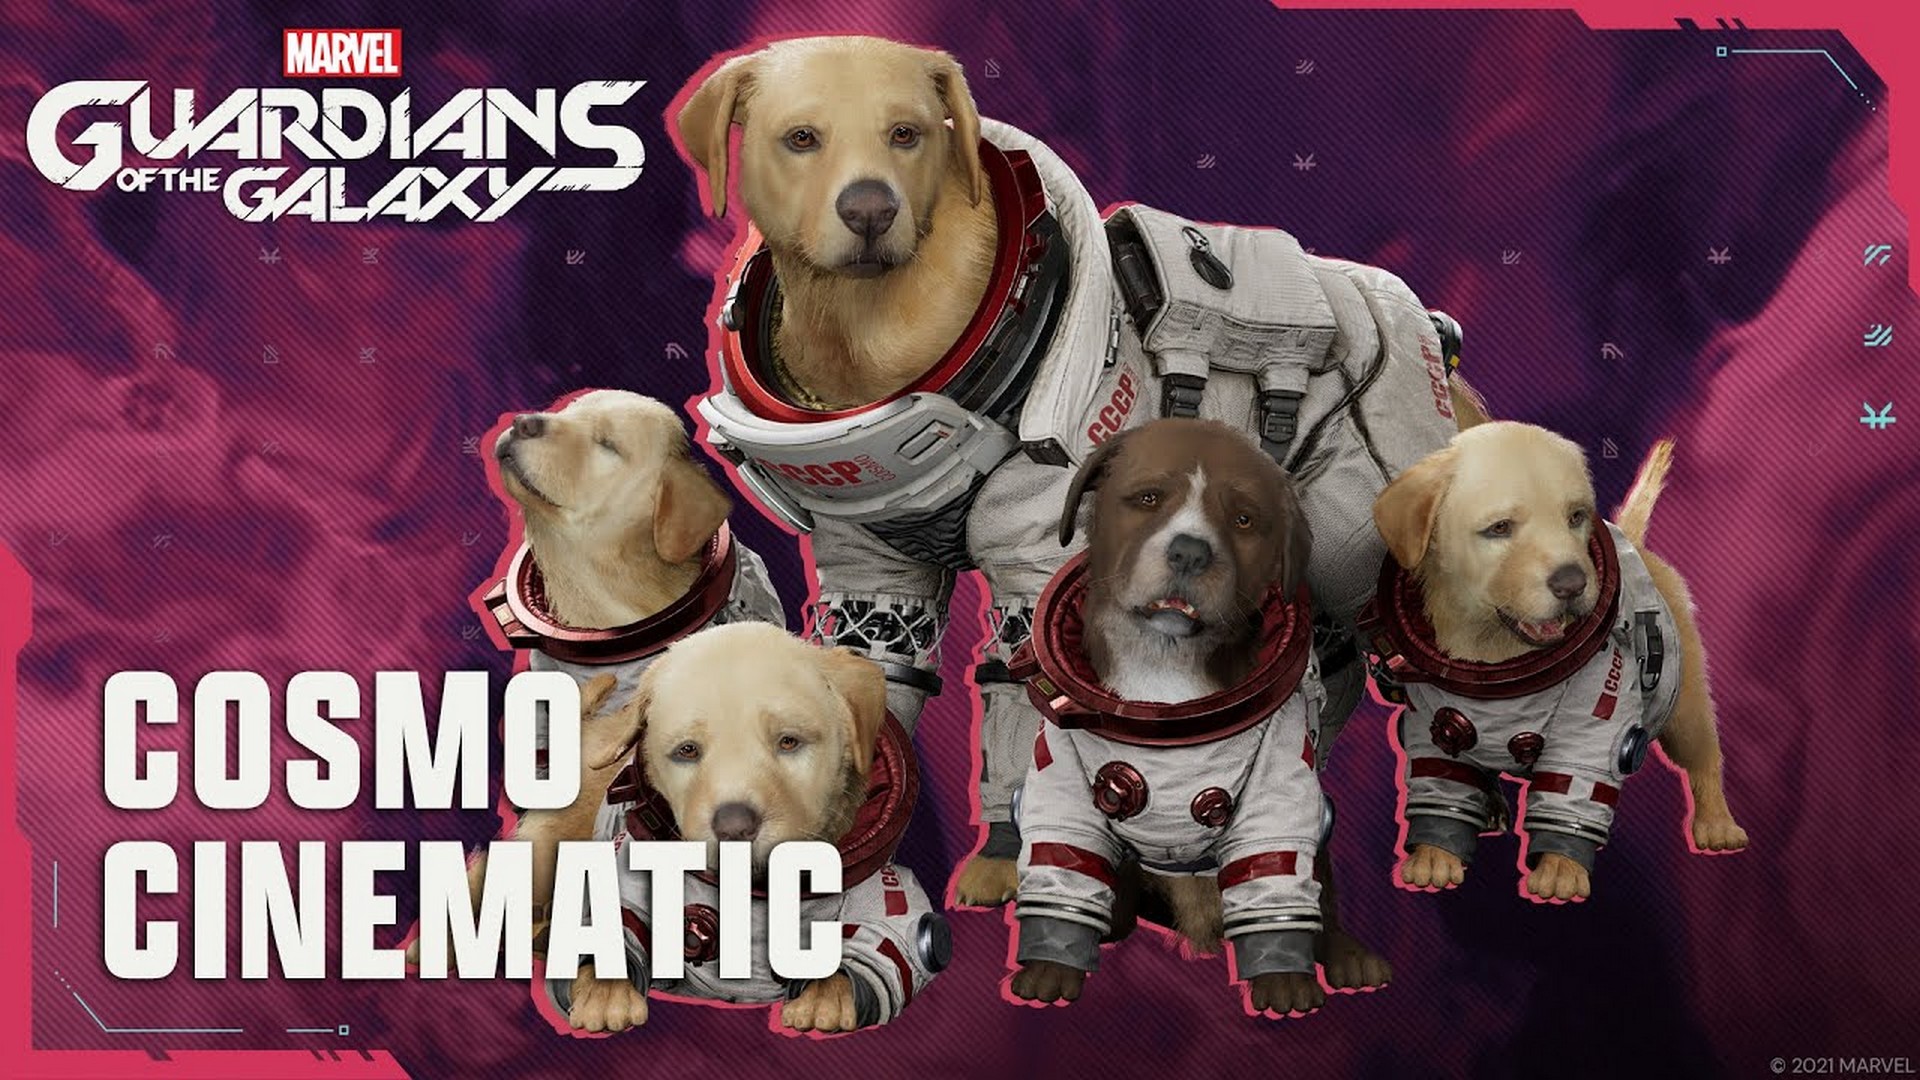 Cosmo The Space Dog Fetches A New Cutscene For Marvel’s Guardians Of The Galaxy